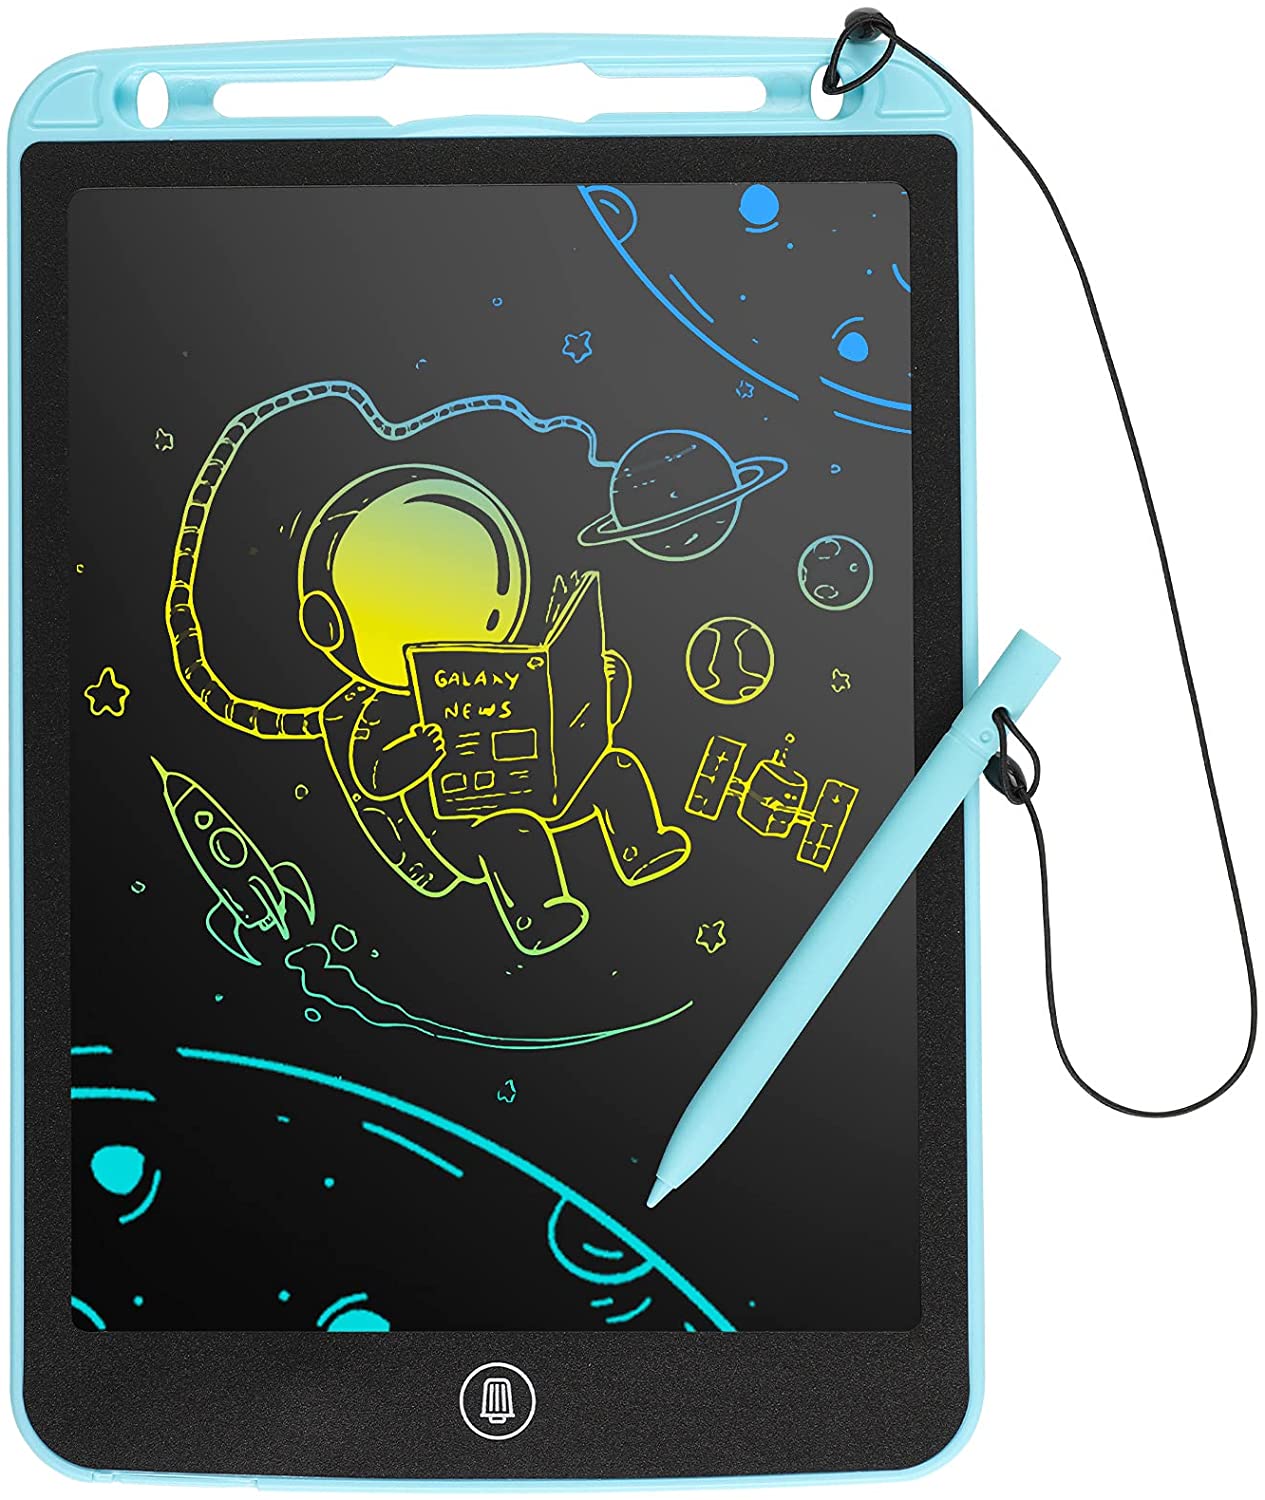 9" Inch Colorful LCD Digital Writing Drawing Tablet Handwriting Pads Fr Kid Gift 